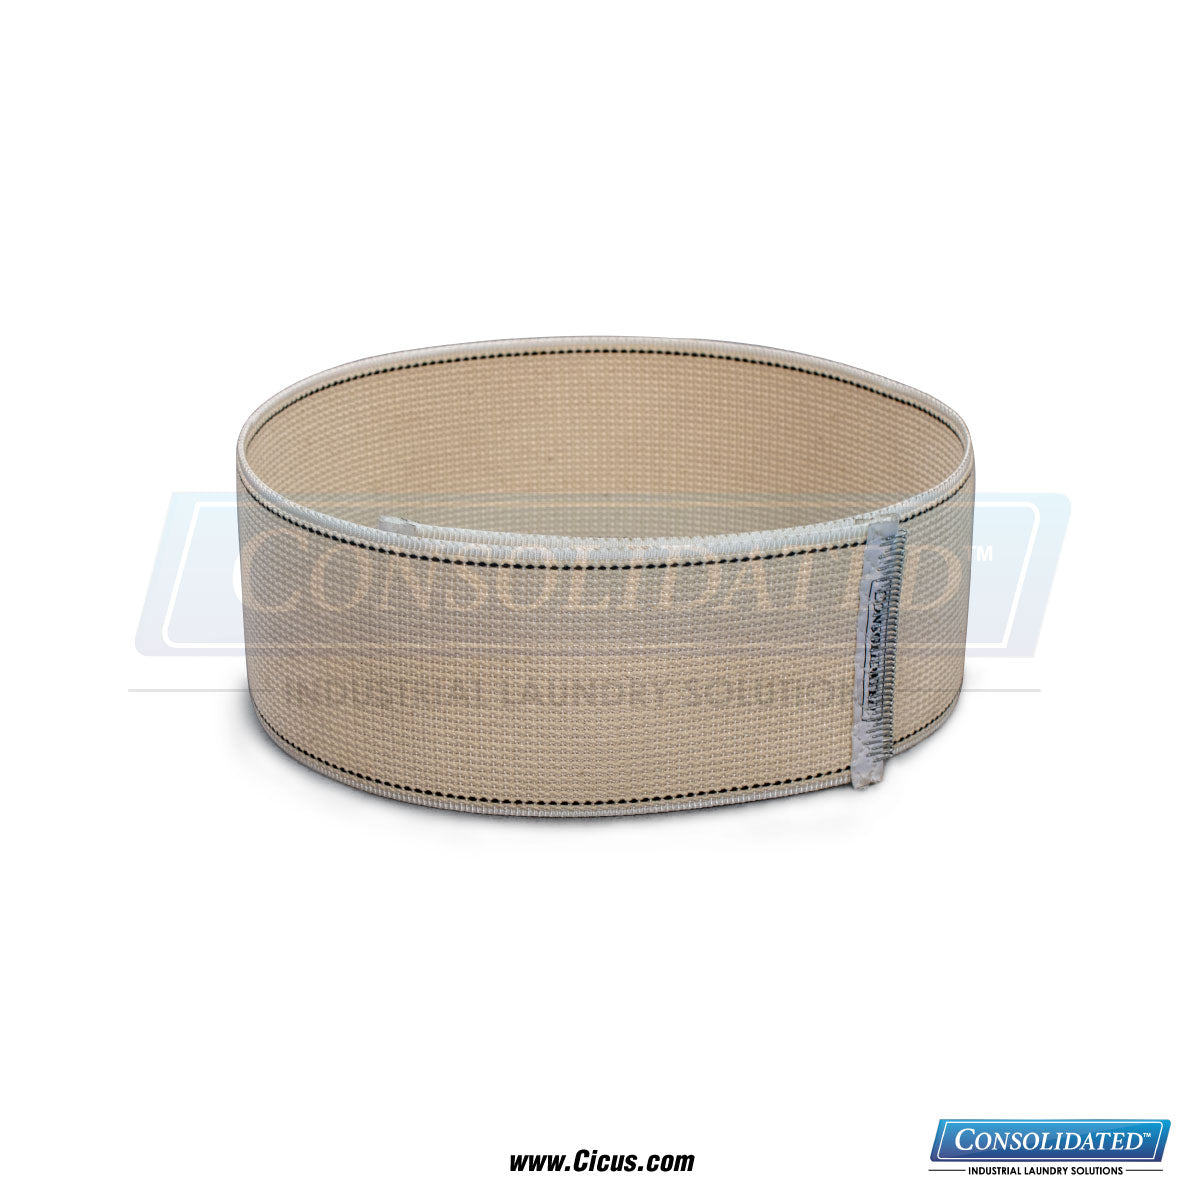 CIC Exclusive Chicago Dryer Canvas Ribbon - 1" x 80" (1001-161)